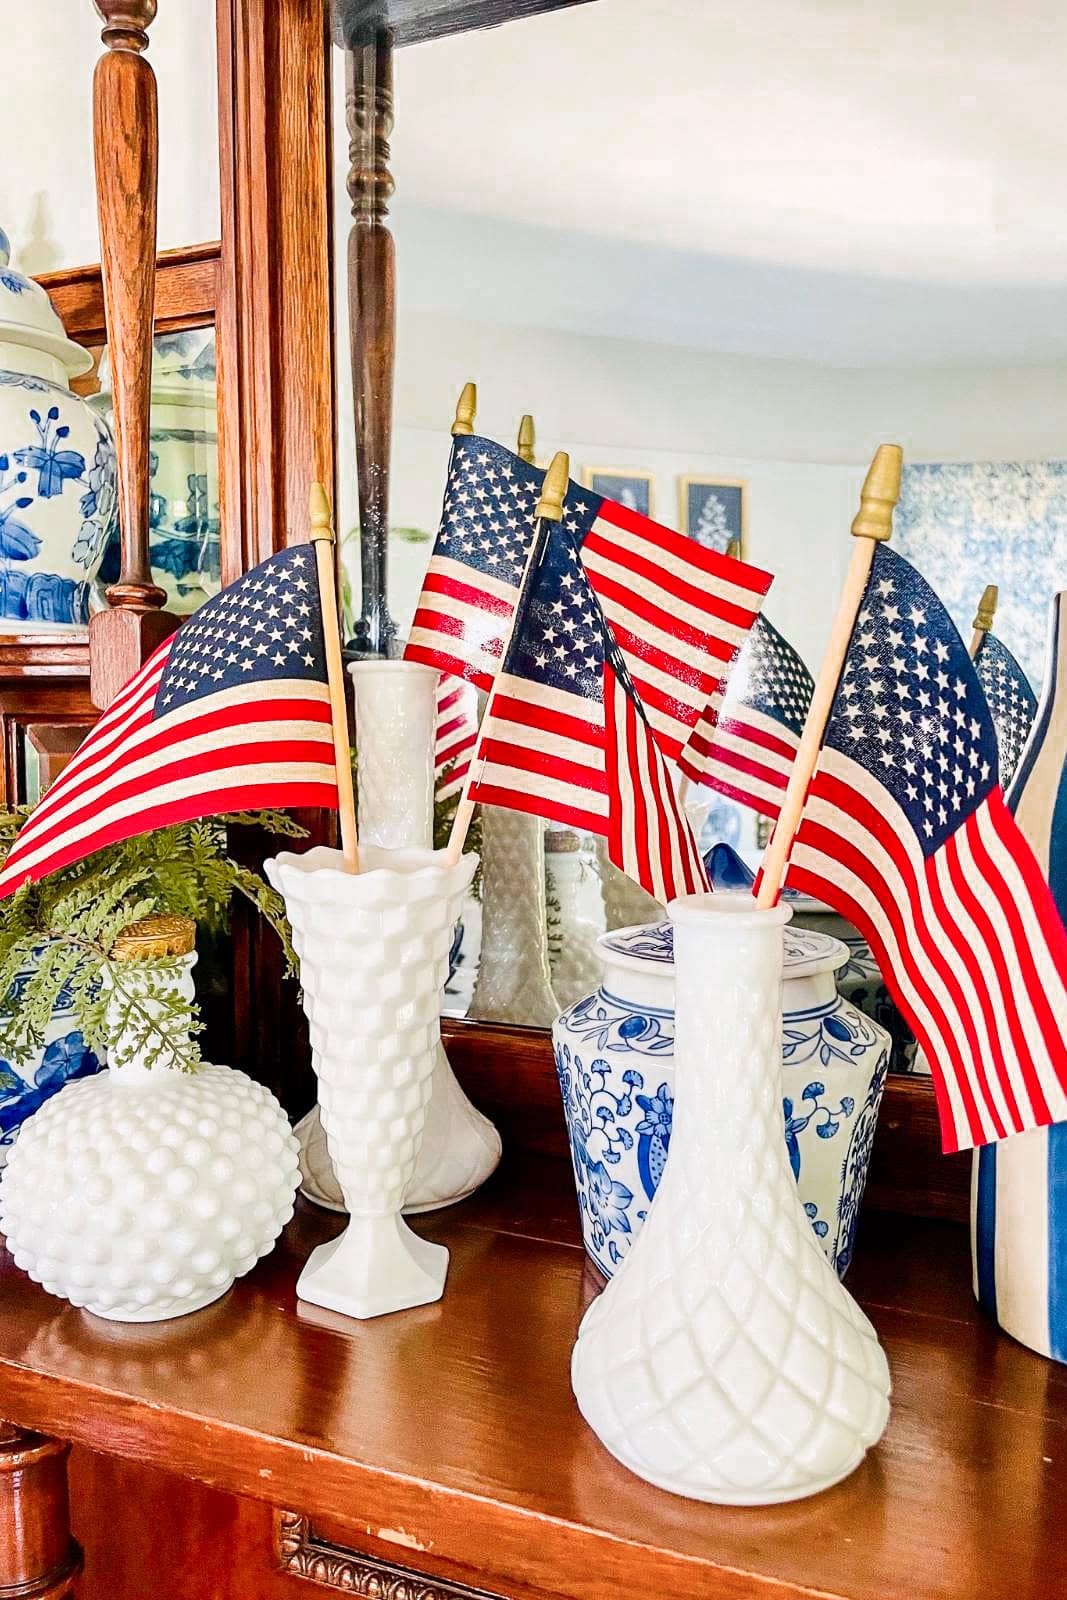 Close up view of American Flags displayed in a collection of milk glass vases on the fireplace mantel